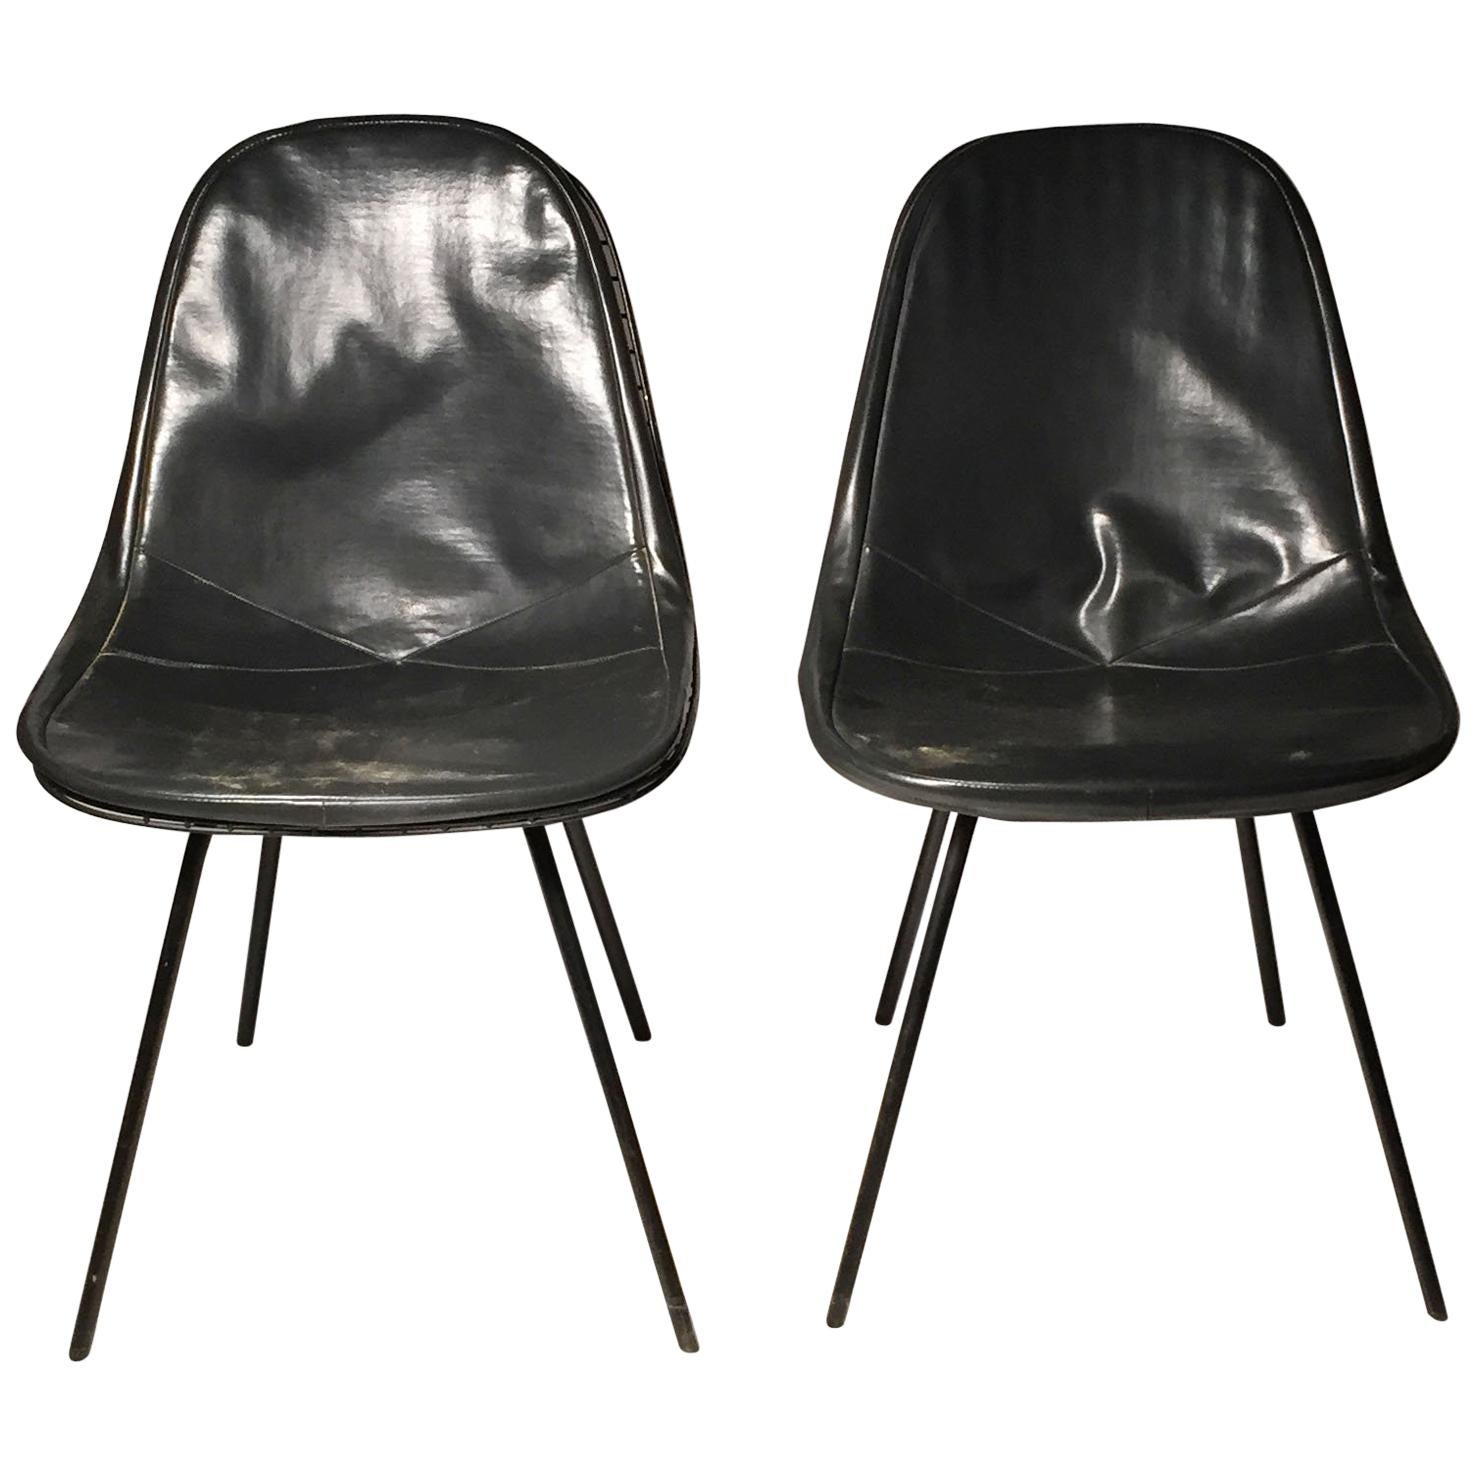 Pair of Fine Early DKX Charles Eames Chairs for Herman Miller